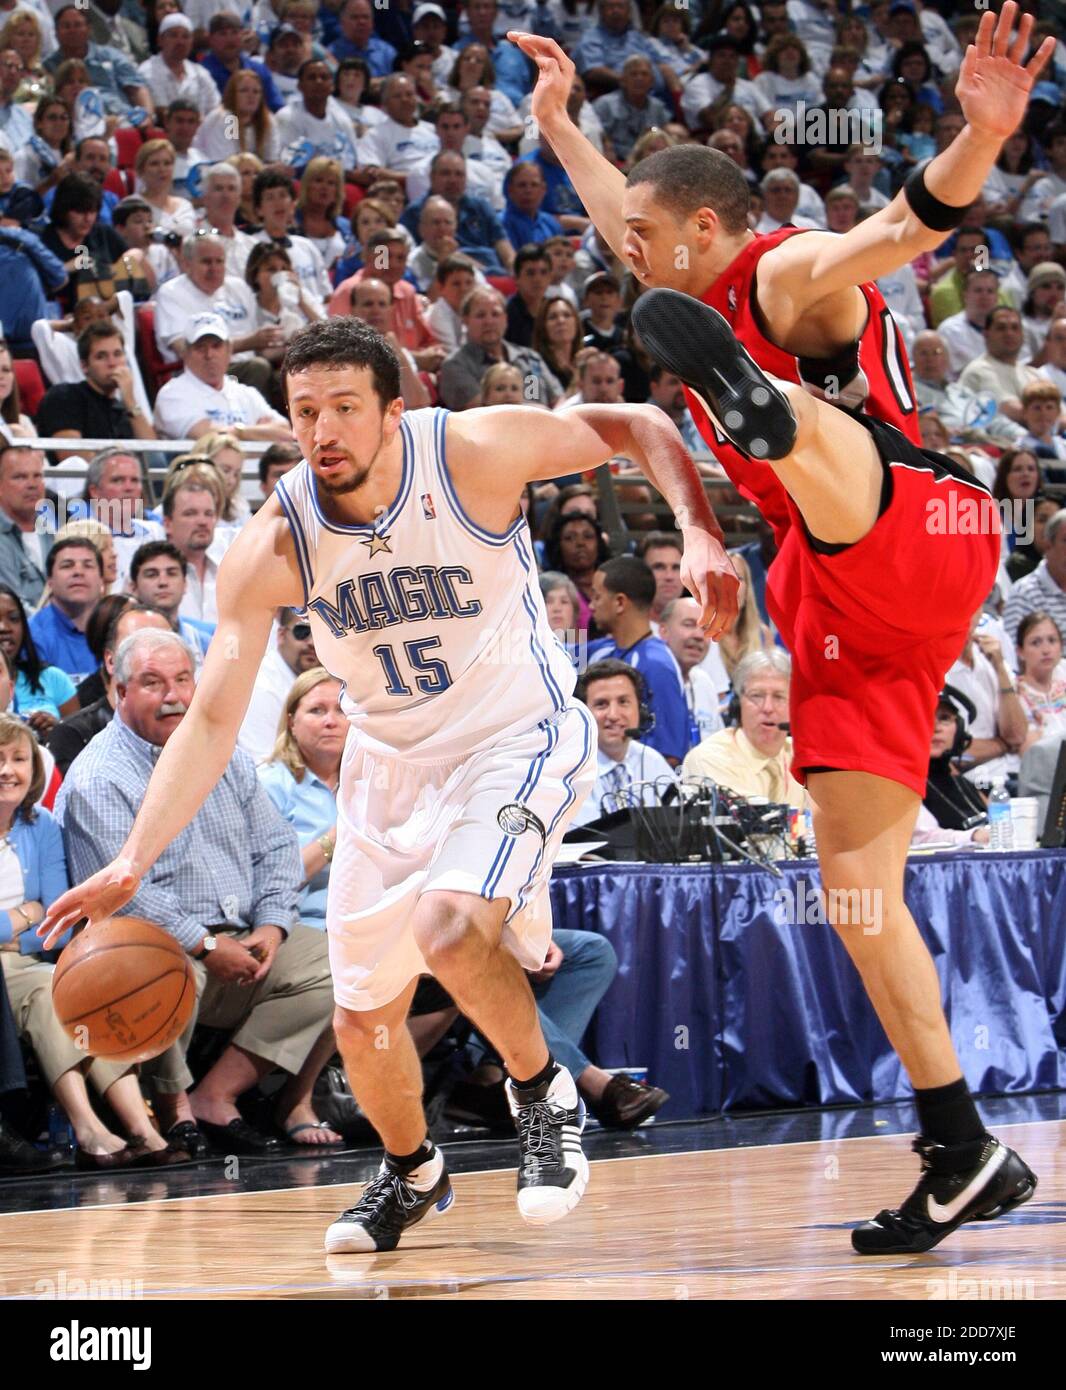 Orlando Magic forward Hedo Turkoglu (15) drives past Toronto Raptors guard Anthony Parker during action in Game 1 of the first round of the NBA Eastern Conference playoffs at Amway Arena in Orlando, FL, USA on April 20, 2008. The Magic defeated the Raptors, 114-100. Photo by Gary W. Green/Orlando Sentinel/MCT/Cameleon/ABACAPRESS.COM Stock Photo